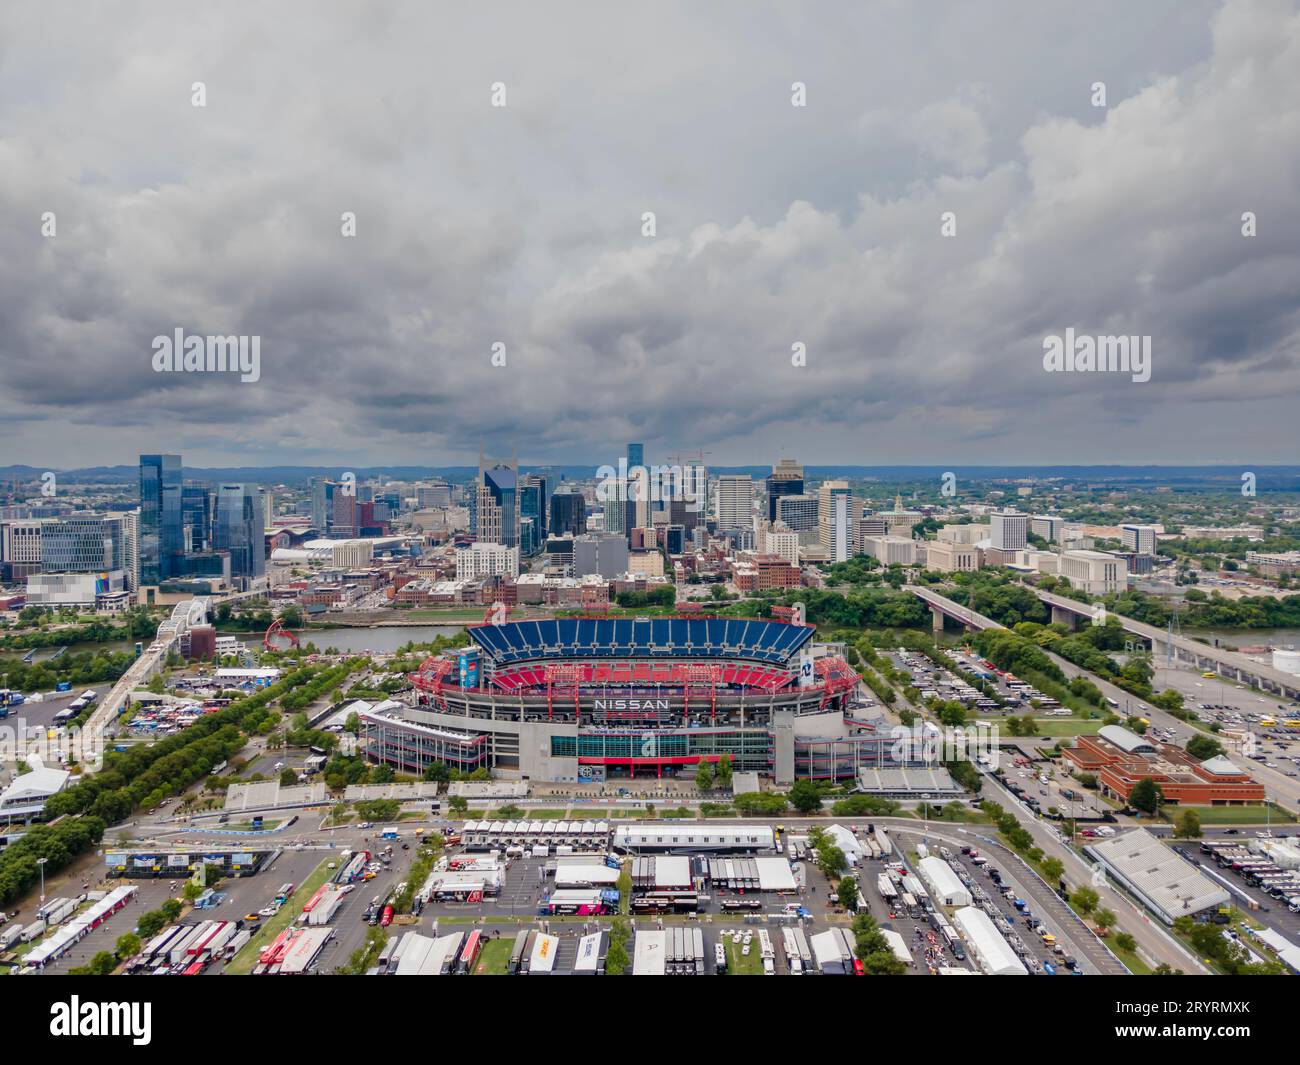 Aerial View Of Nashville, Tennessee Stock Photo